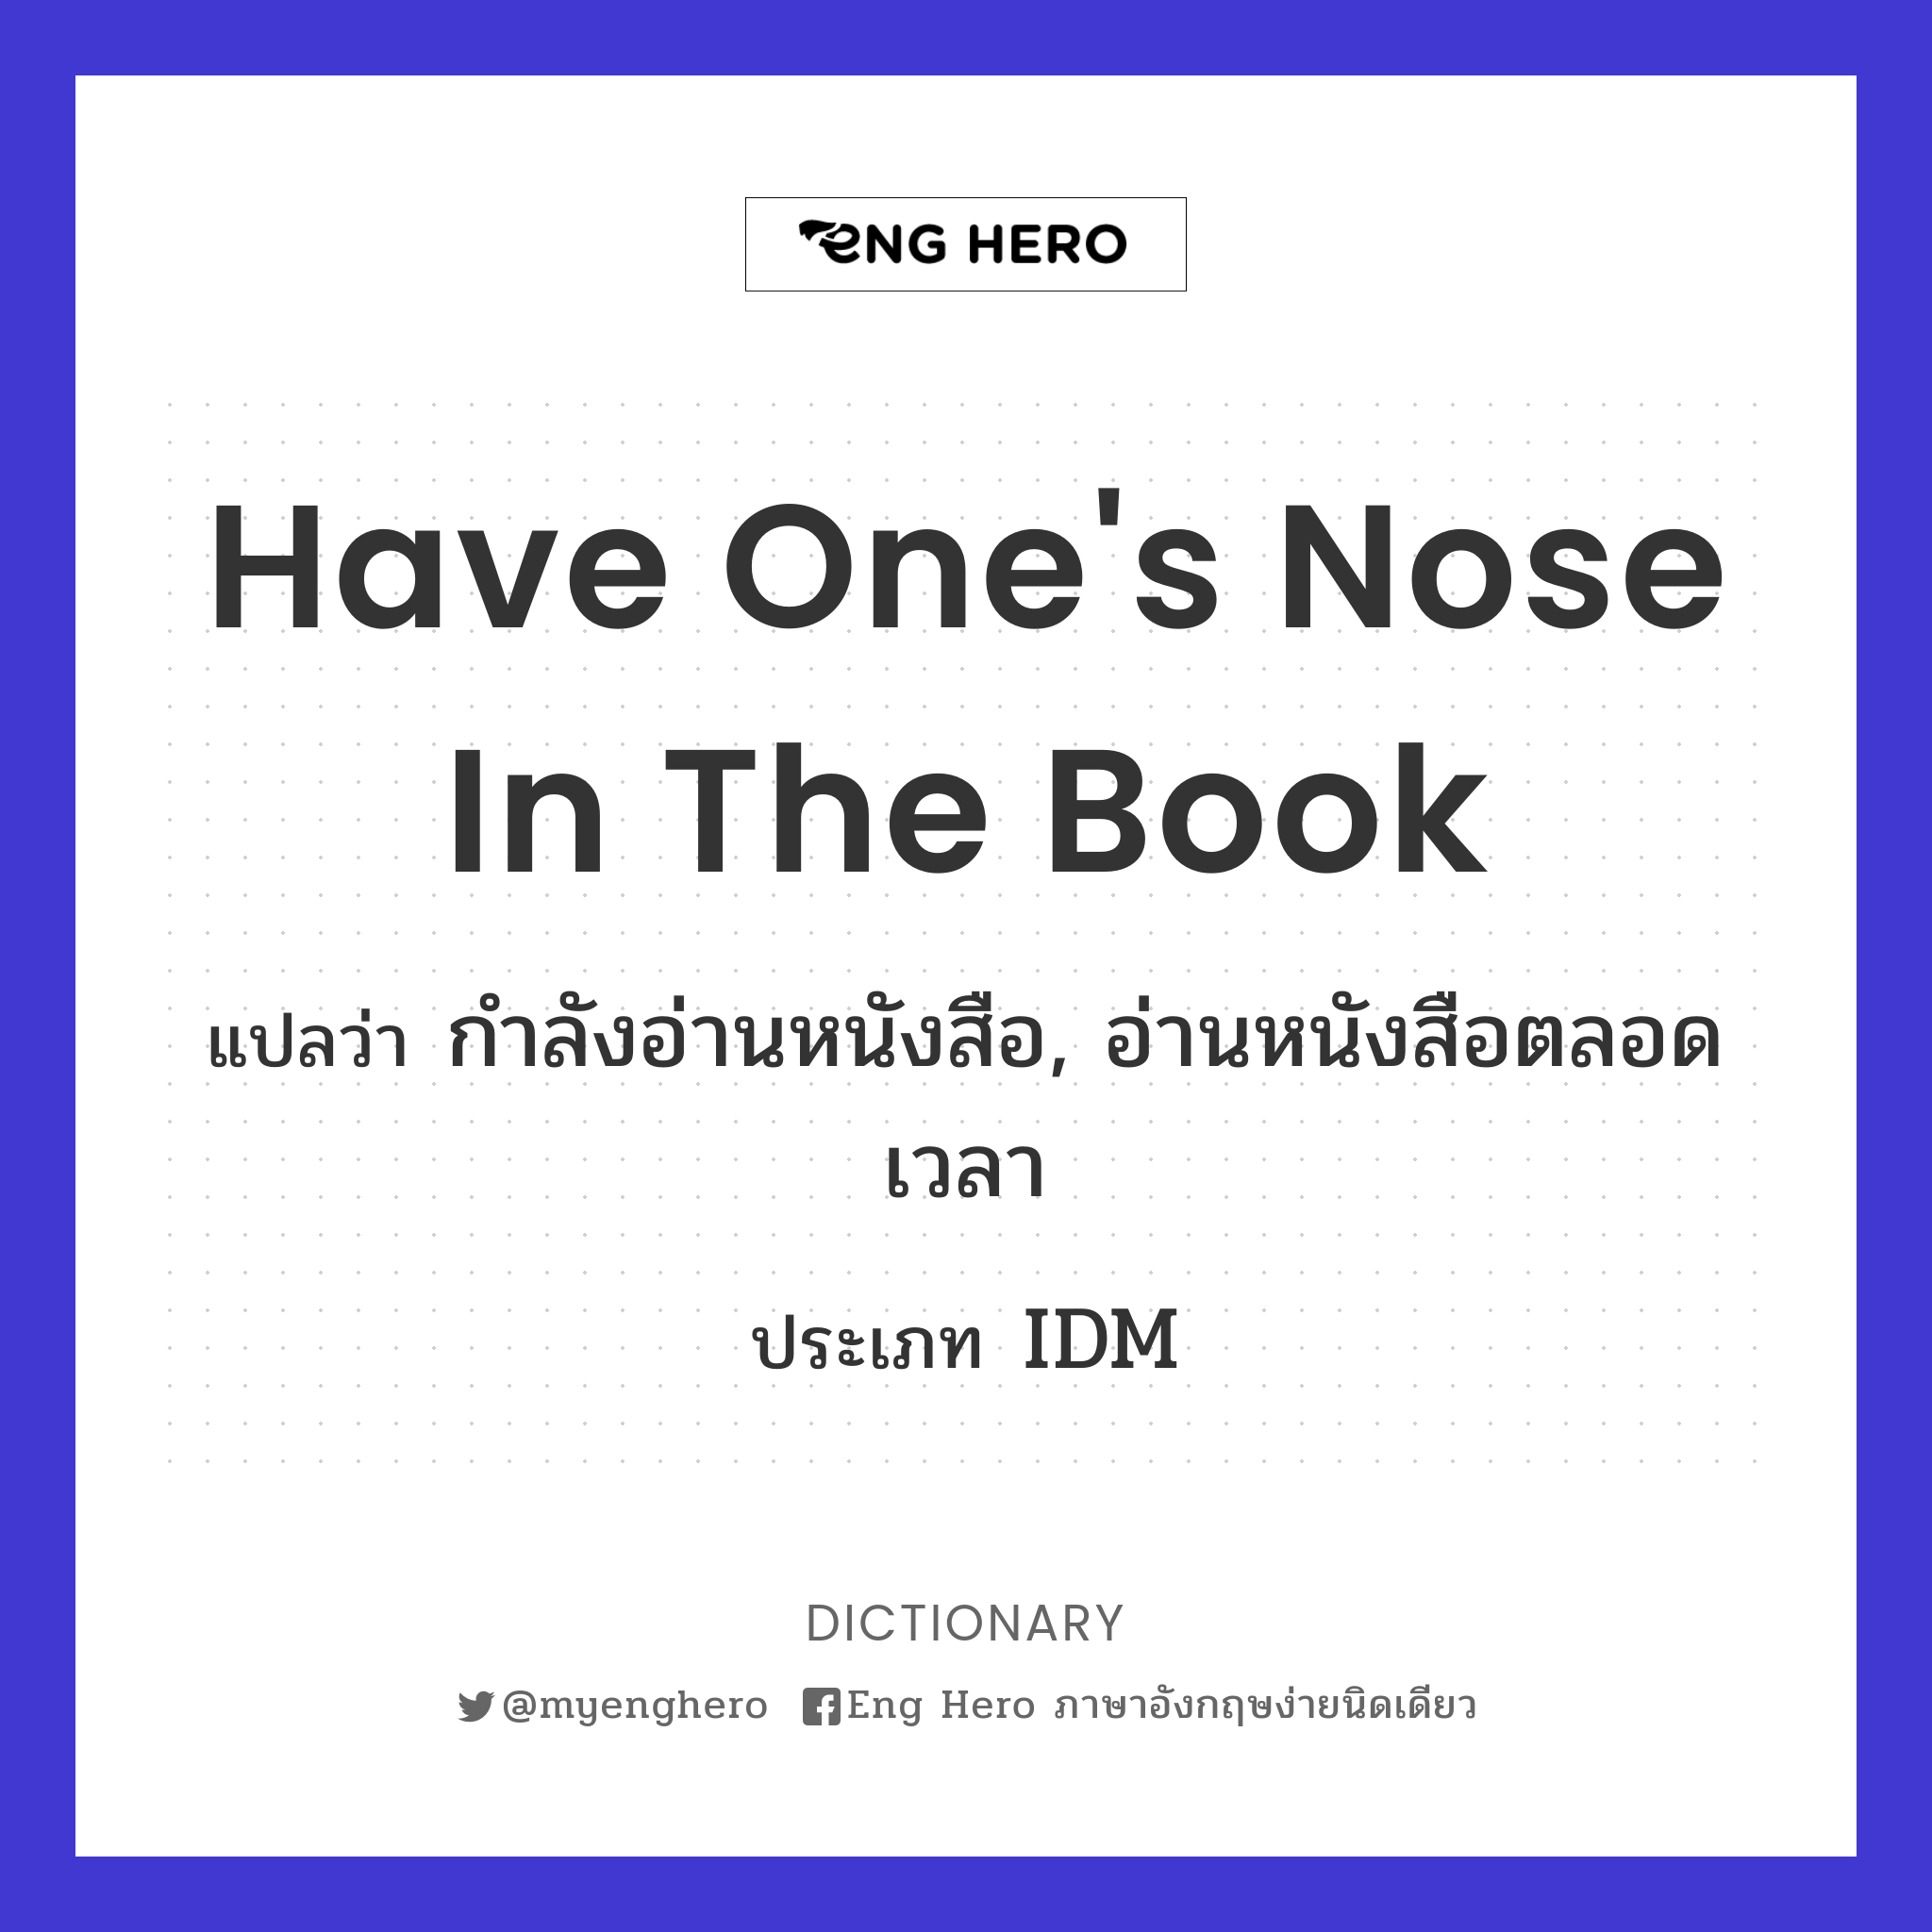 have one's nose in the book